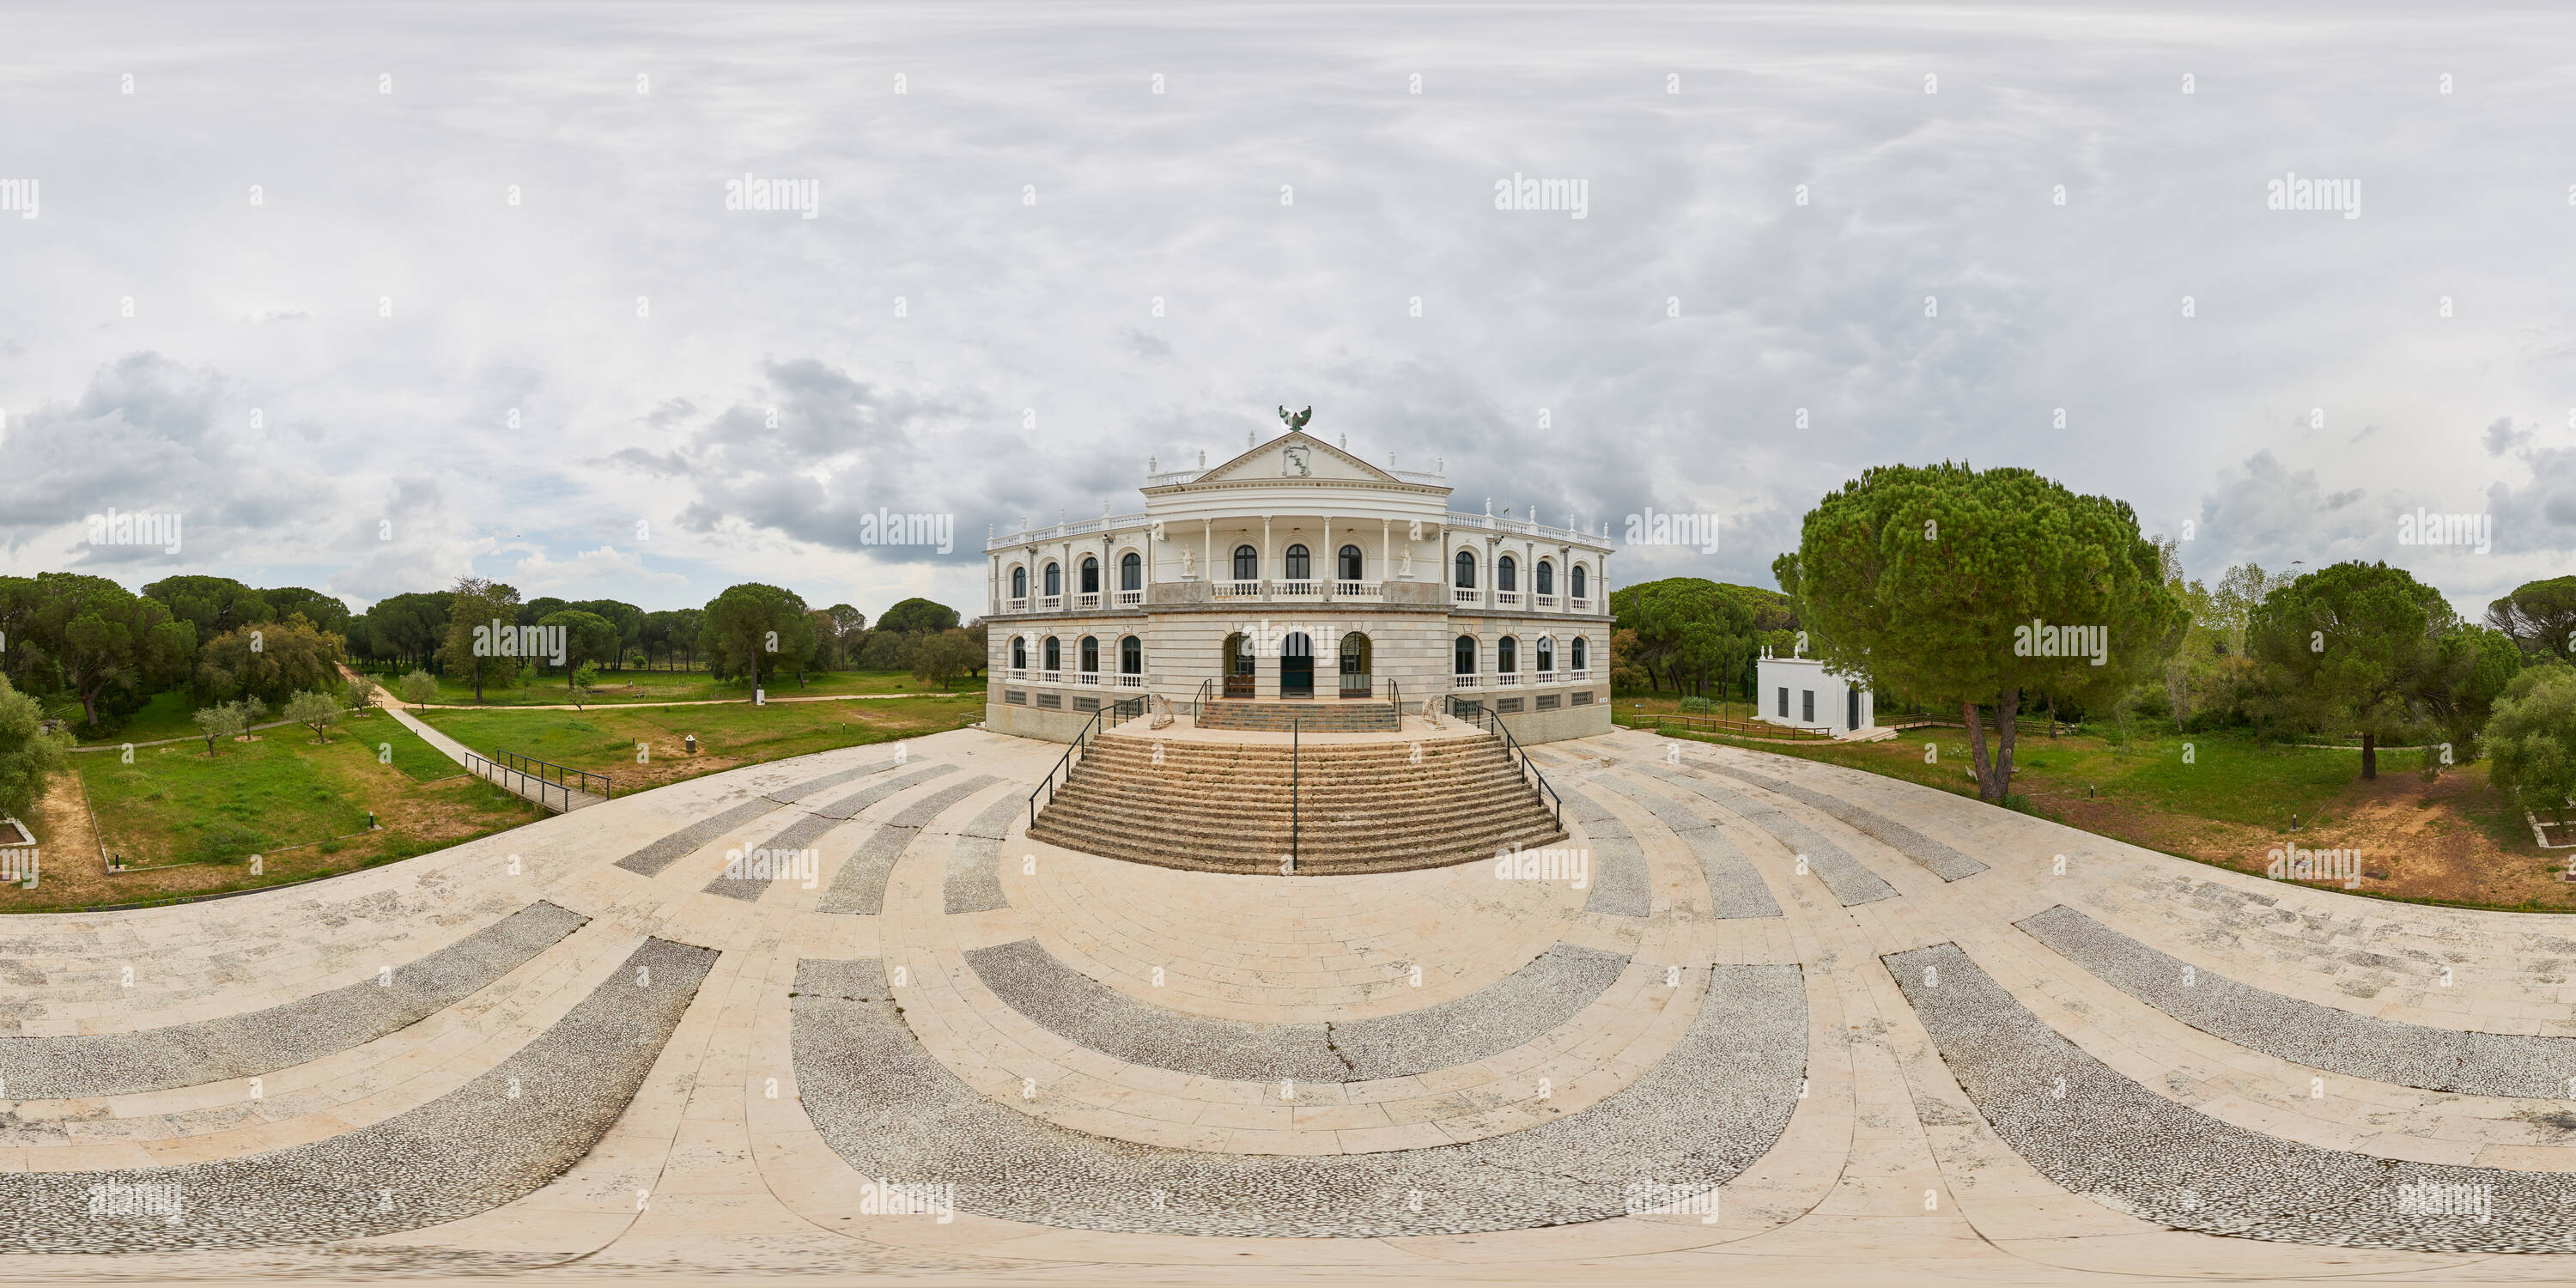 360 degree panoramic view of Acebron palace, Spain